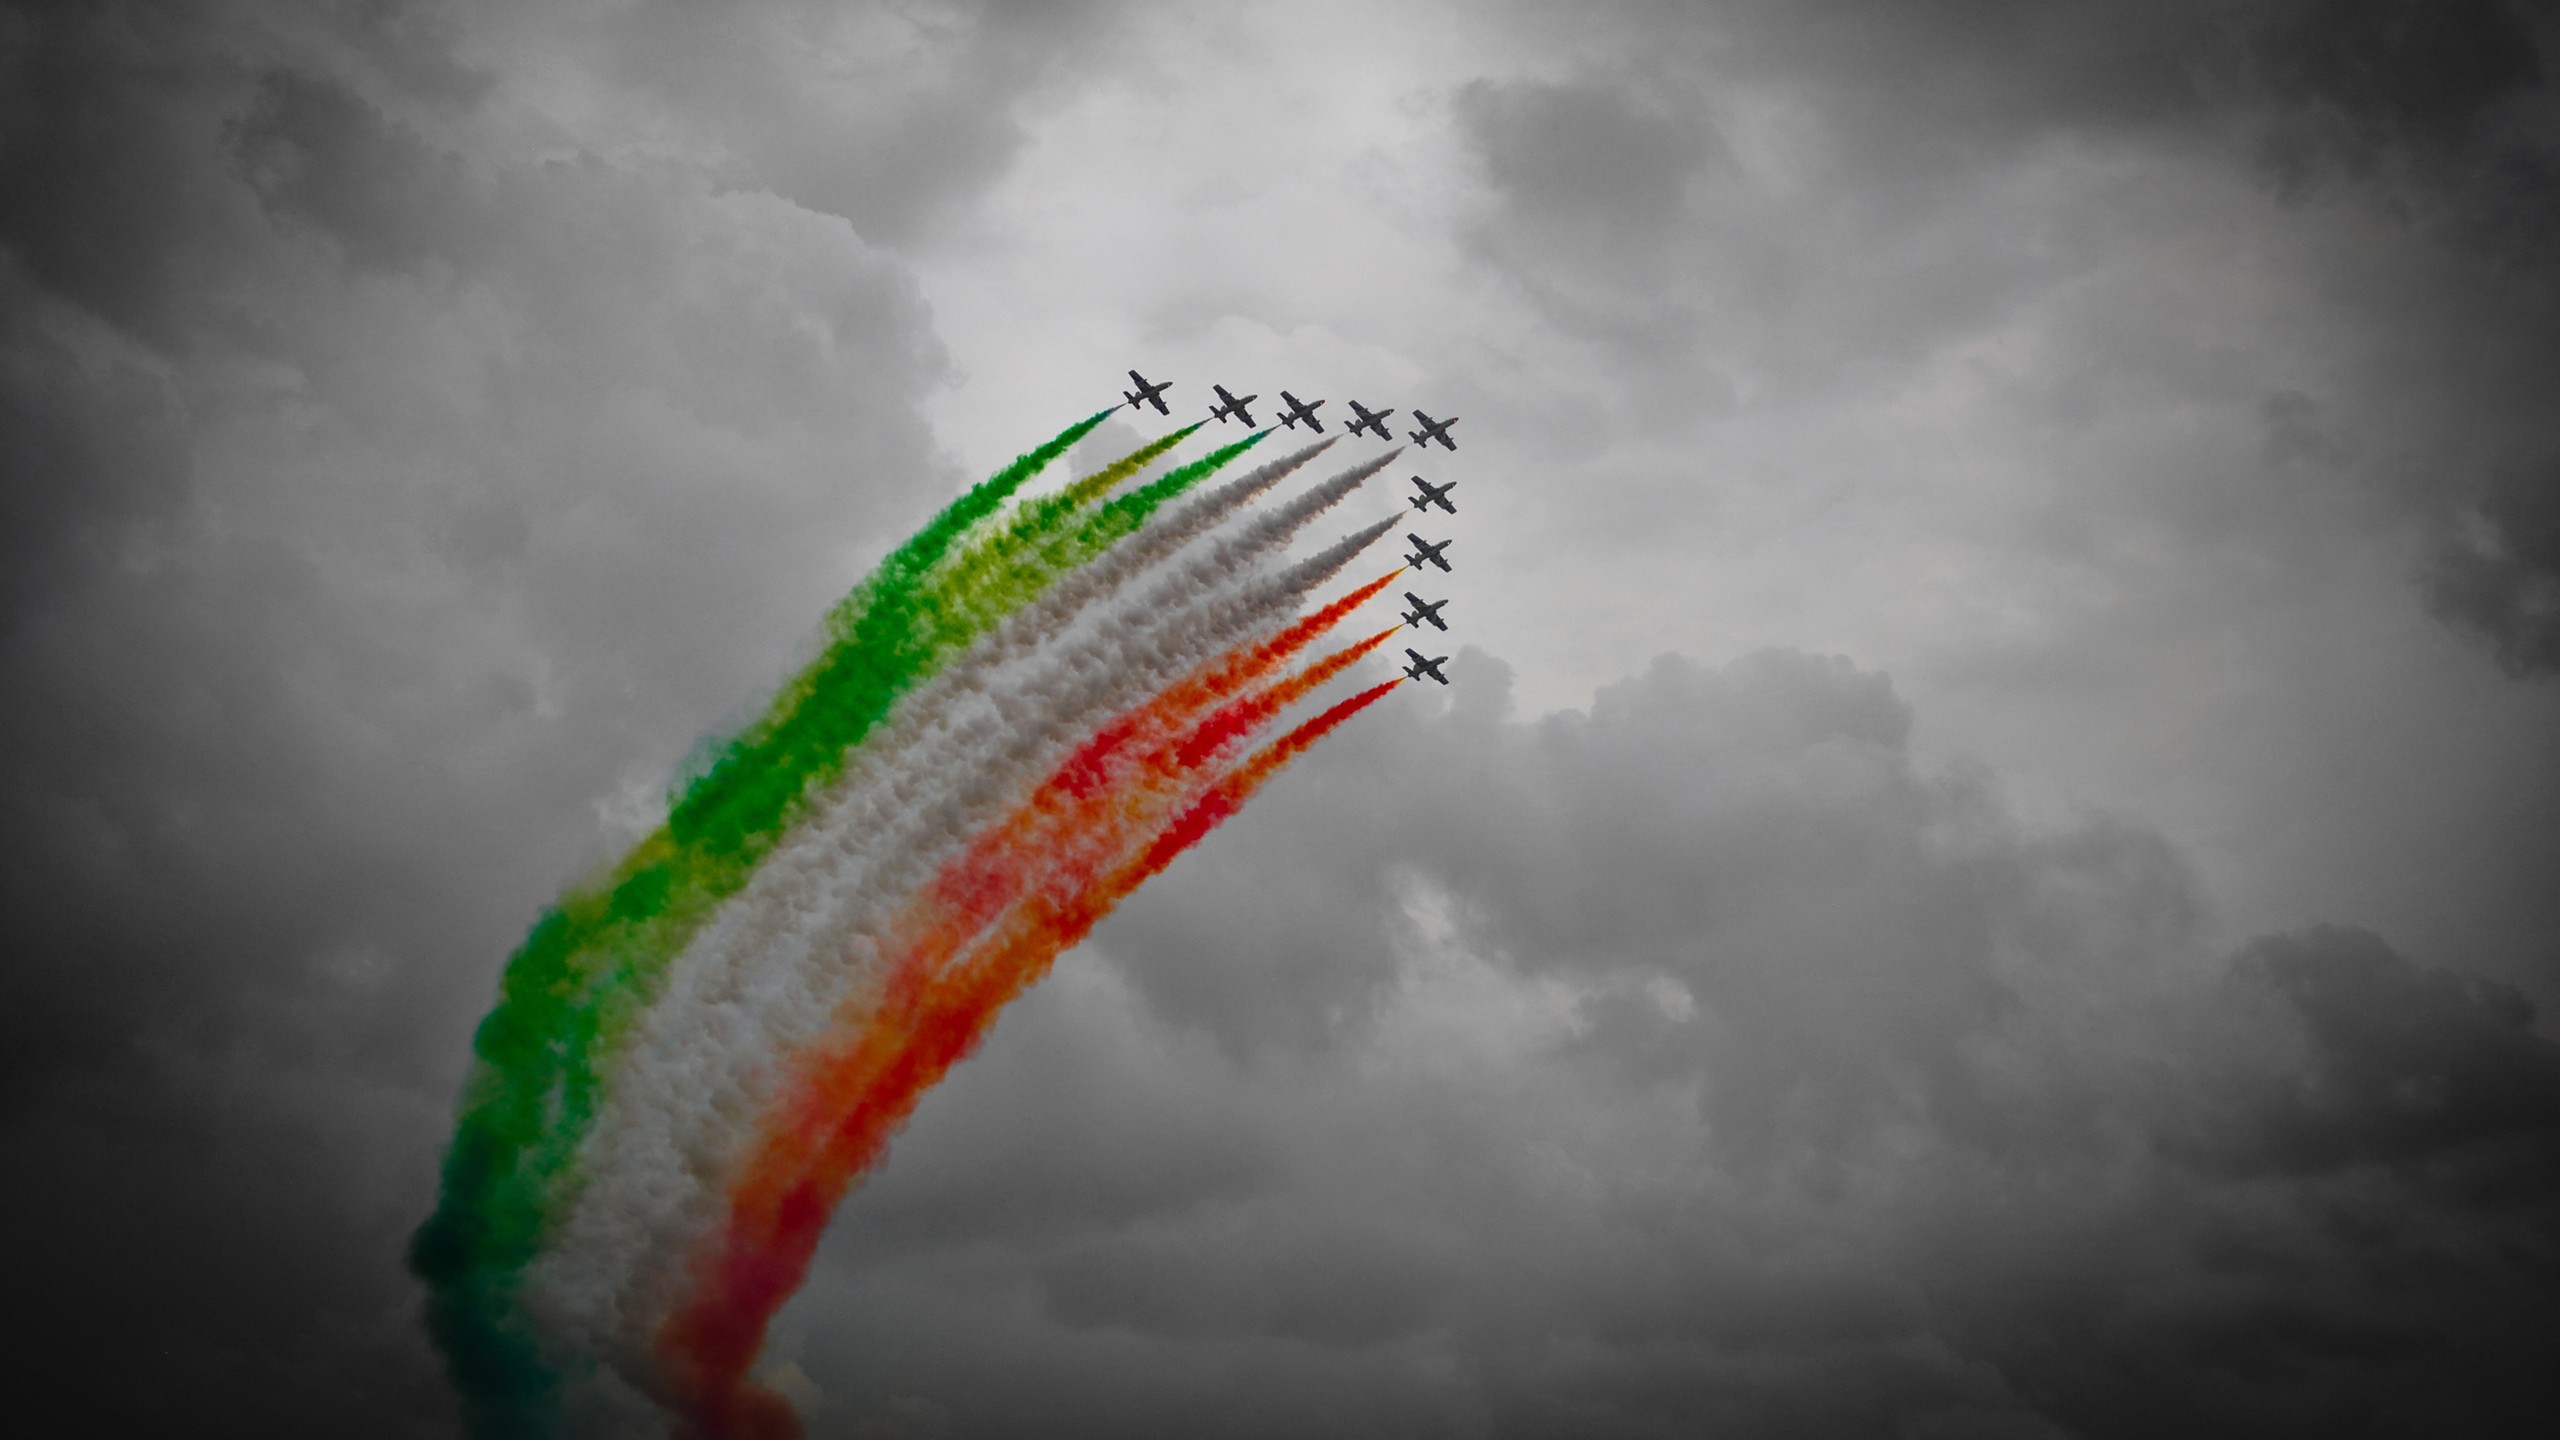 Tricolor made of coloured smoke wallpapers and images - wallpapers ...